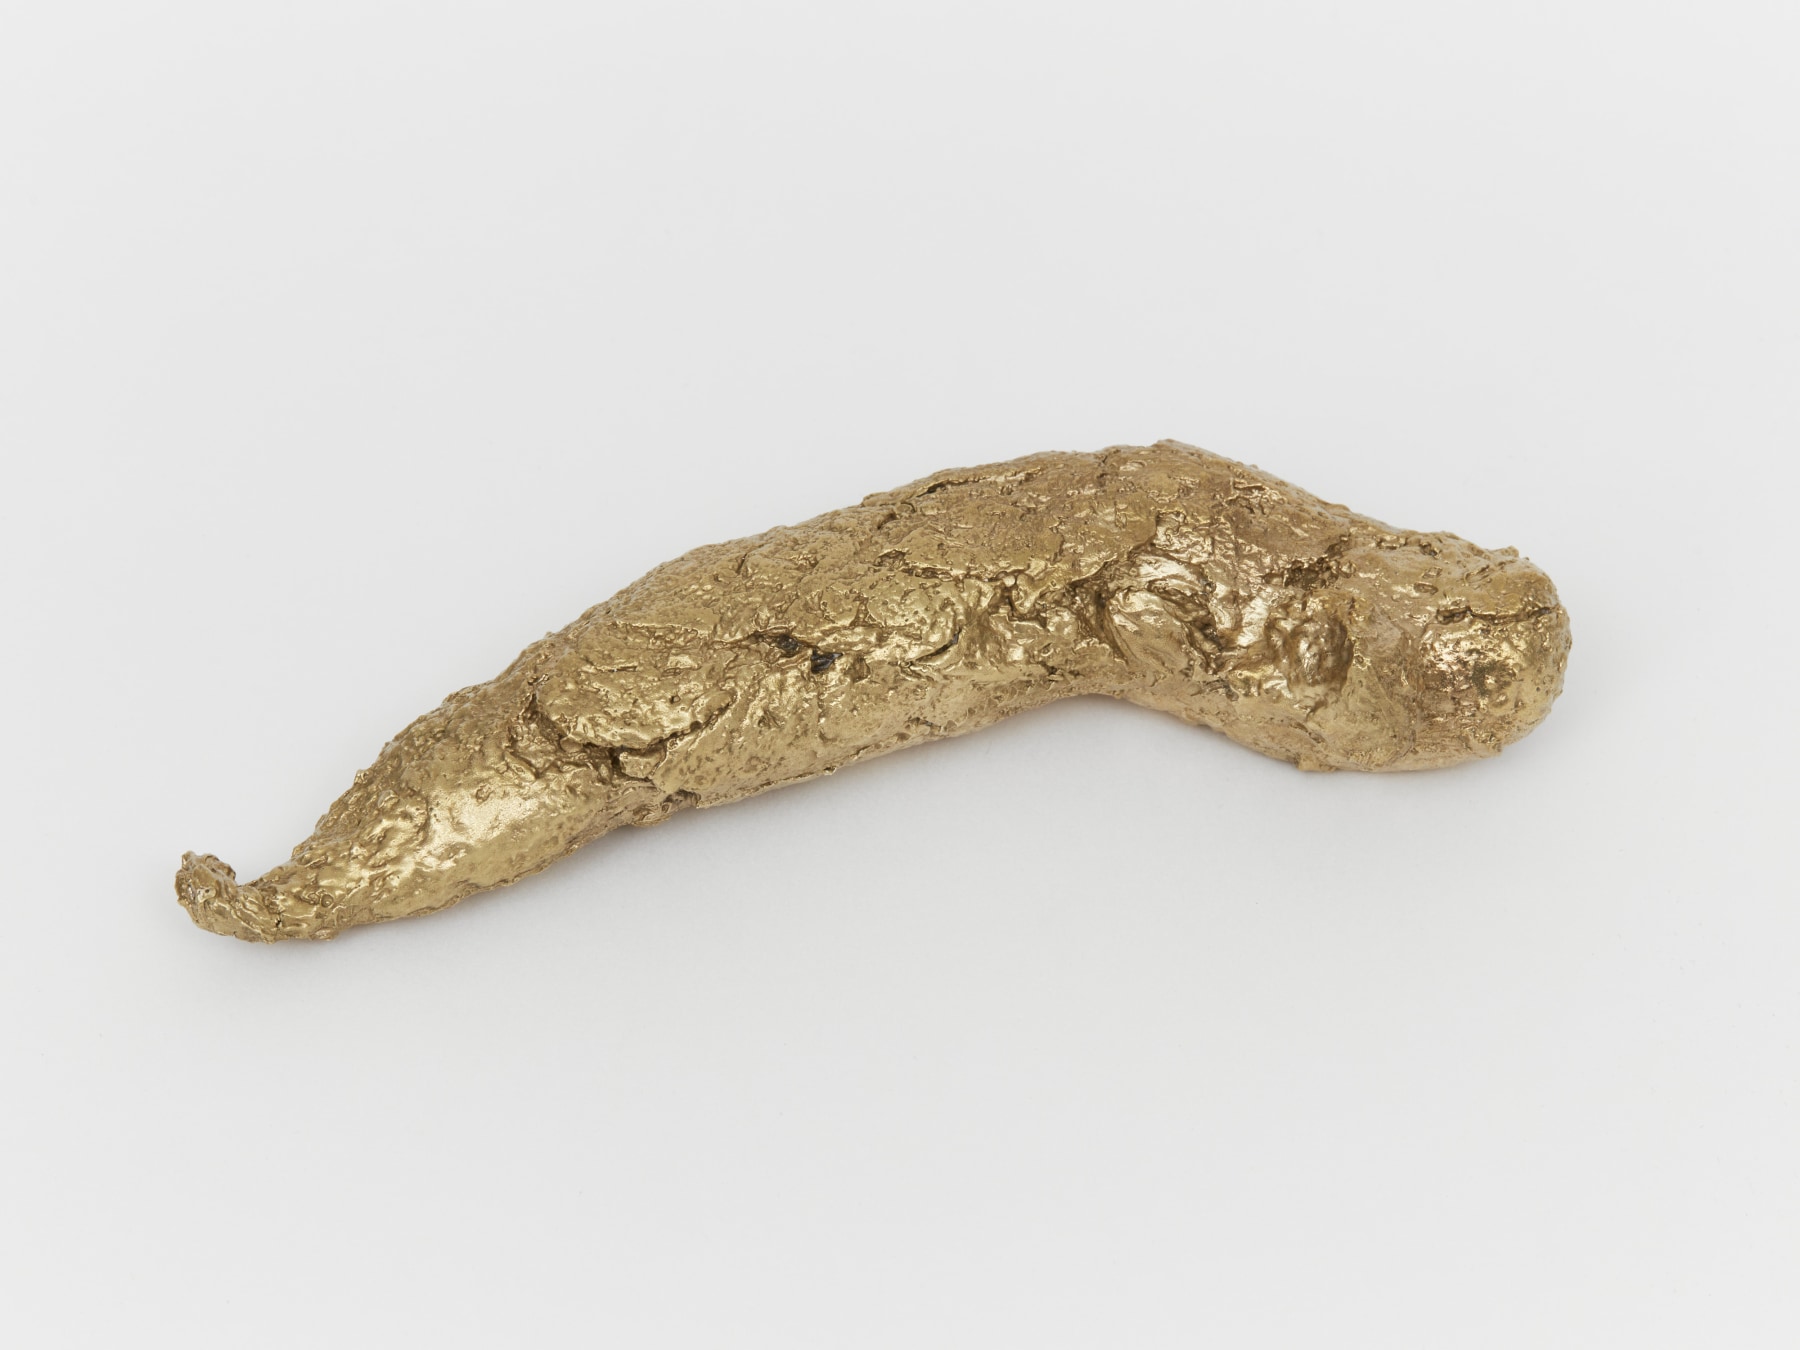 A piece of brass casted excrement. 